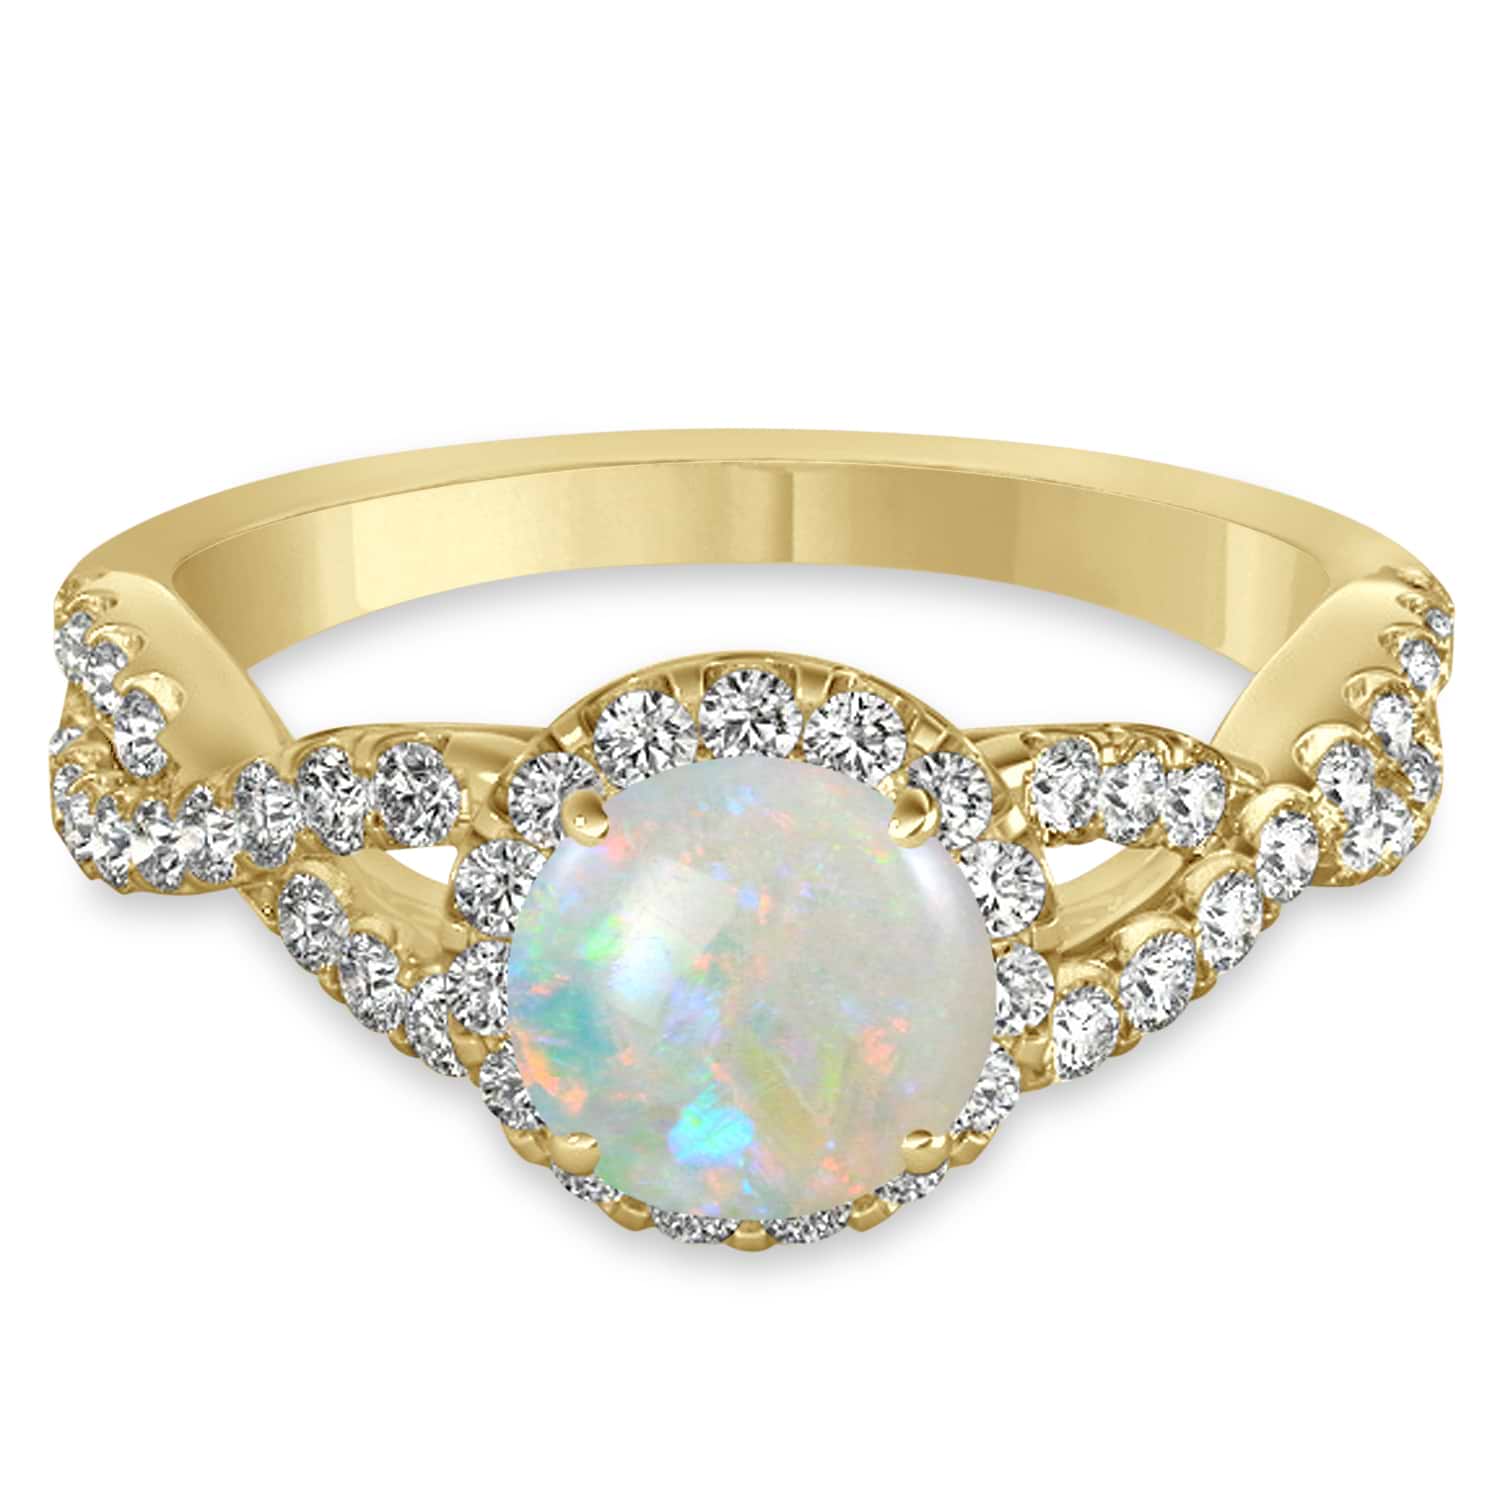 Opal & Diamond Twisted Engagement Ring 14k Yellow Gold 1.07ct